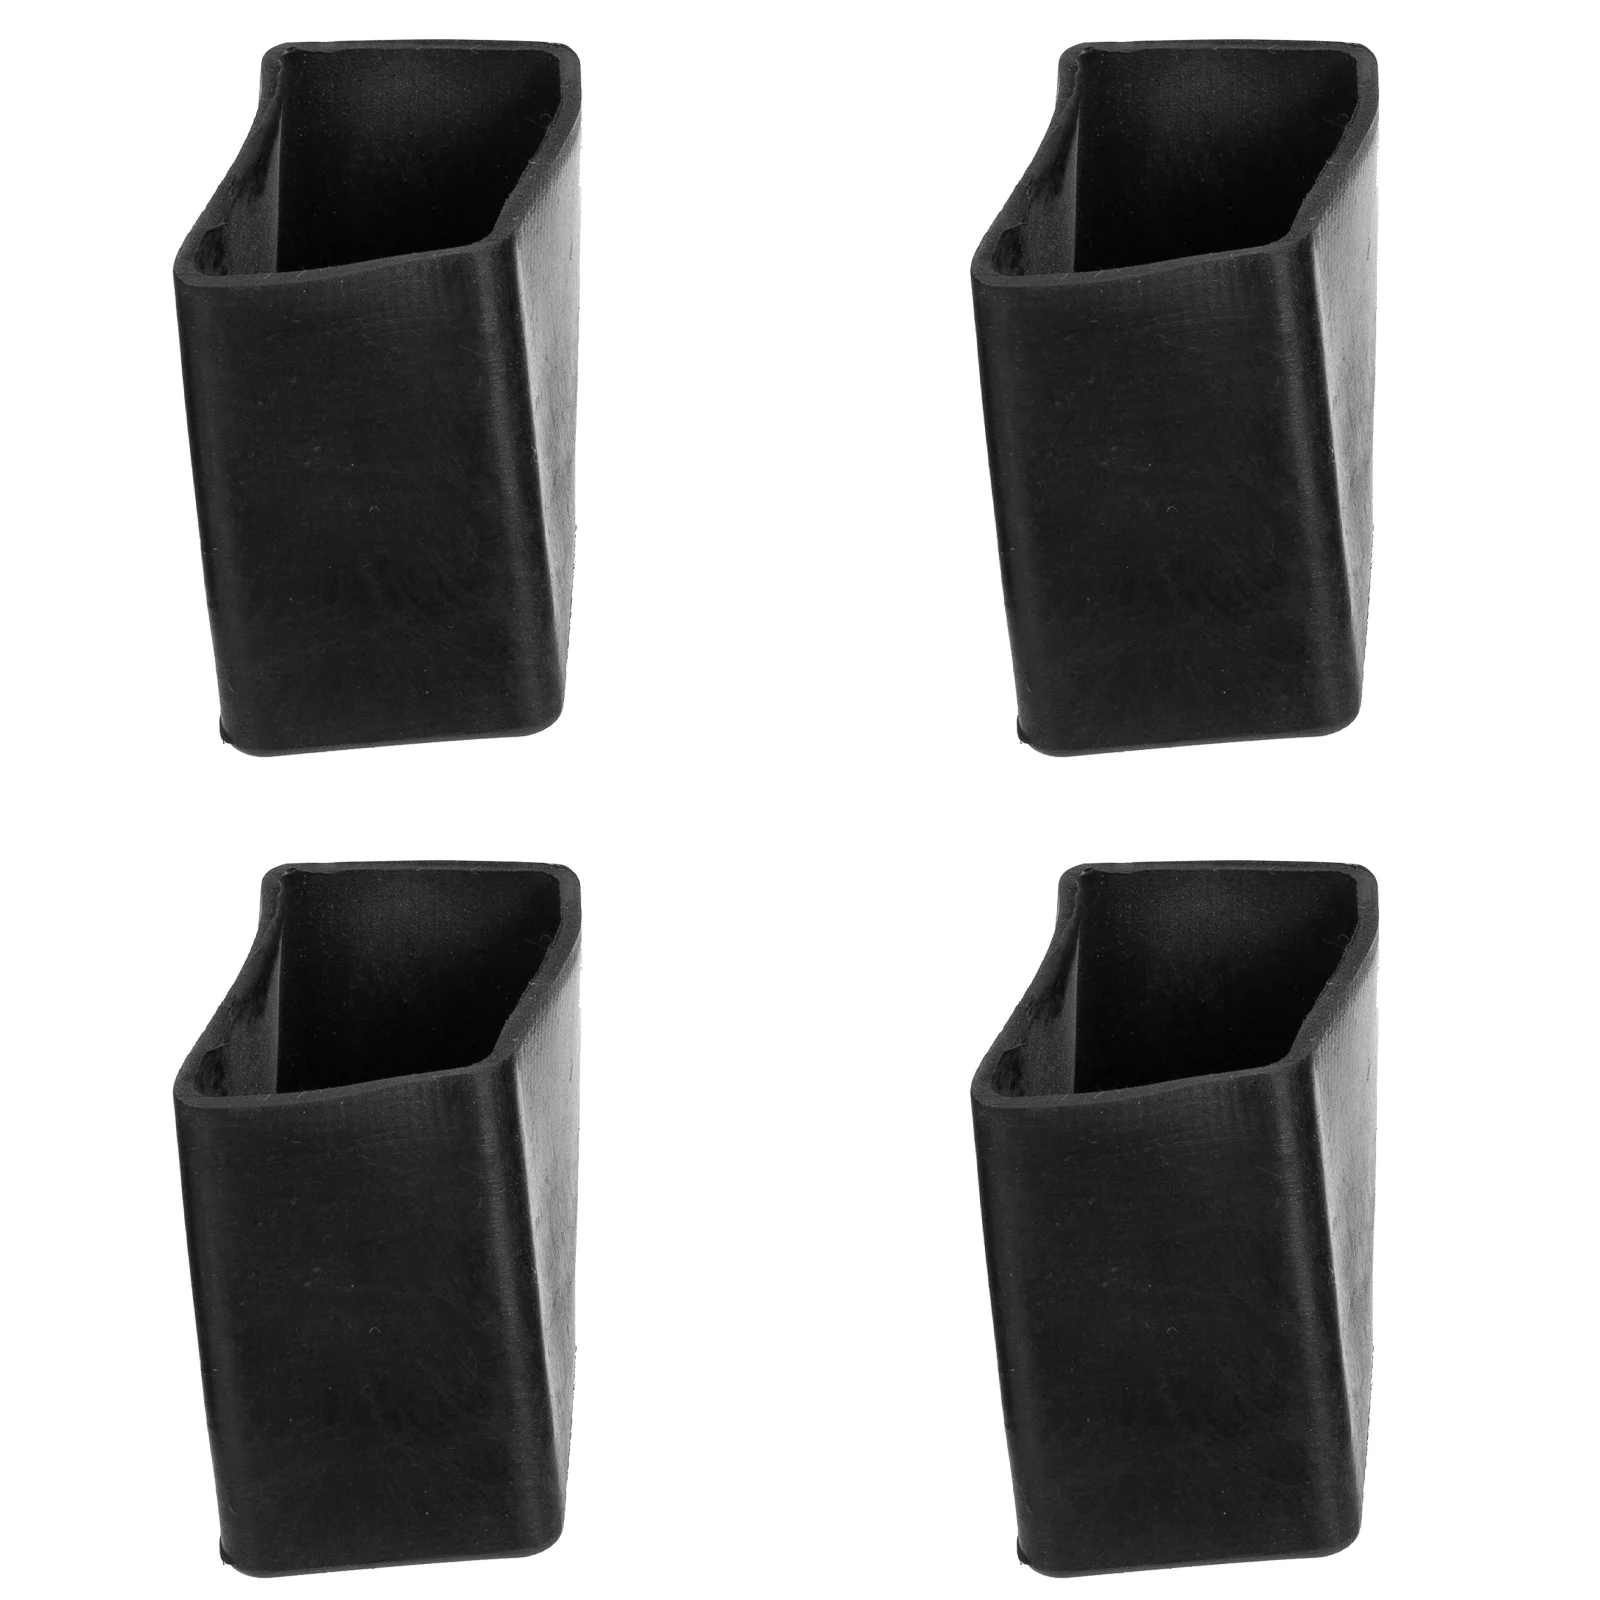 

Ladder Feet Pads Step Rubber Covers Cover Foot Leg Extension Matnonreplacements Caps Cushion Stool Mats Furniture